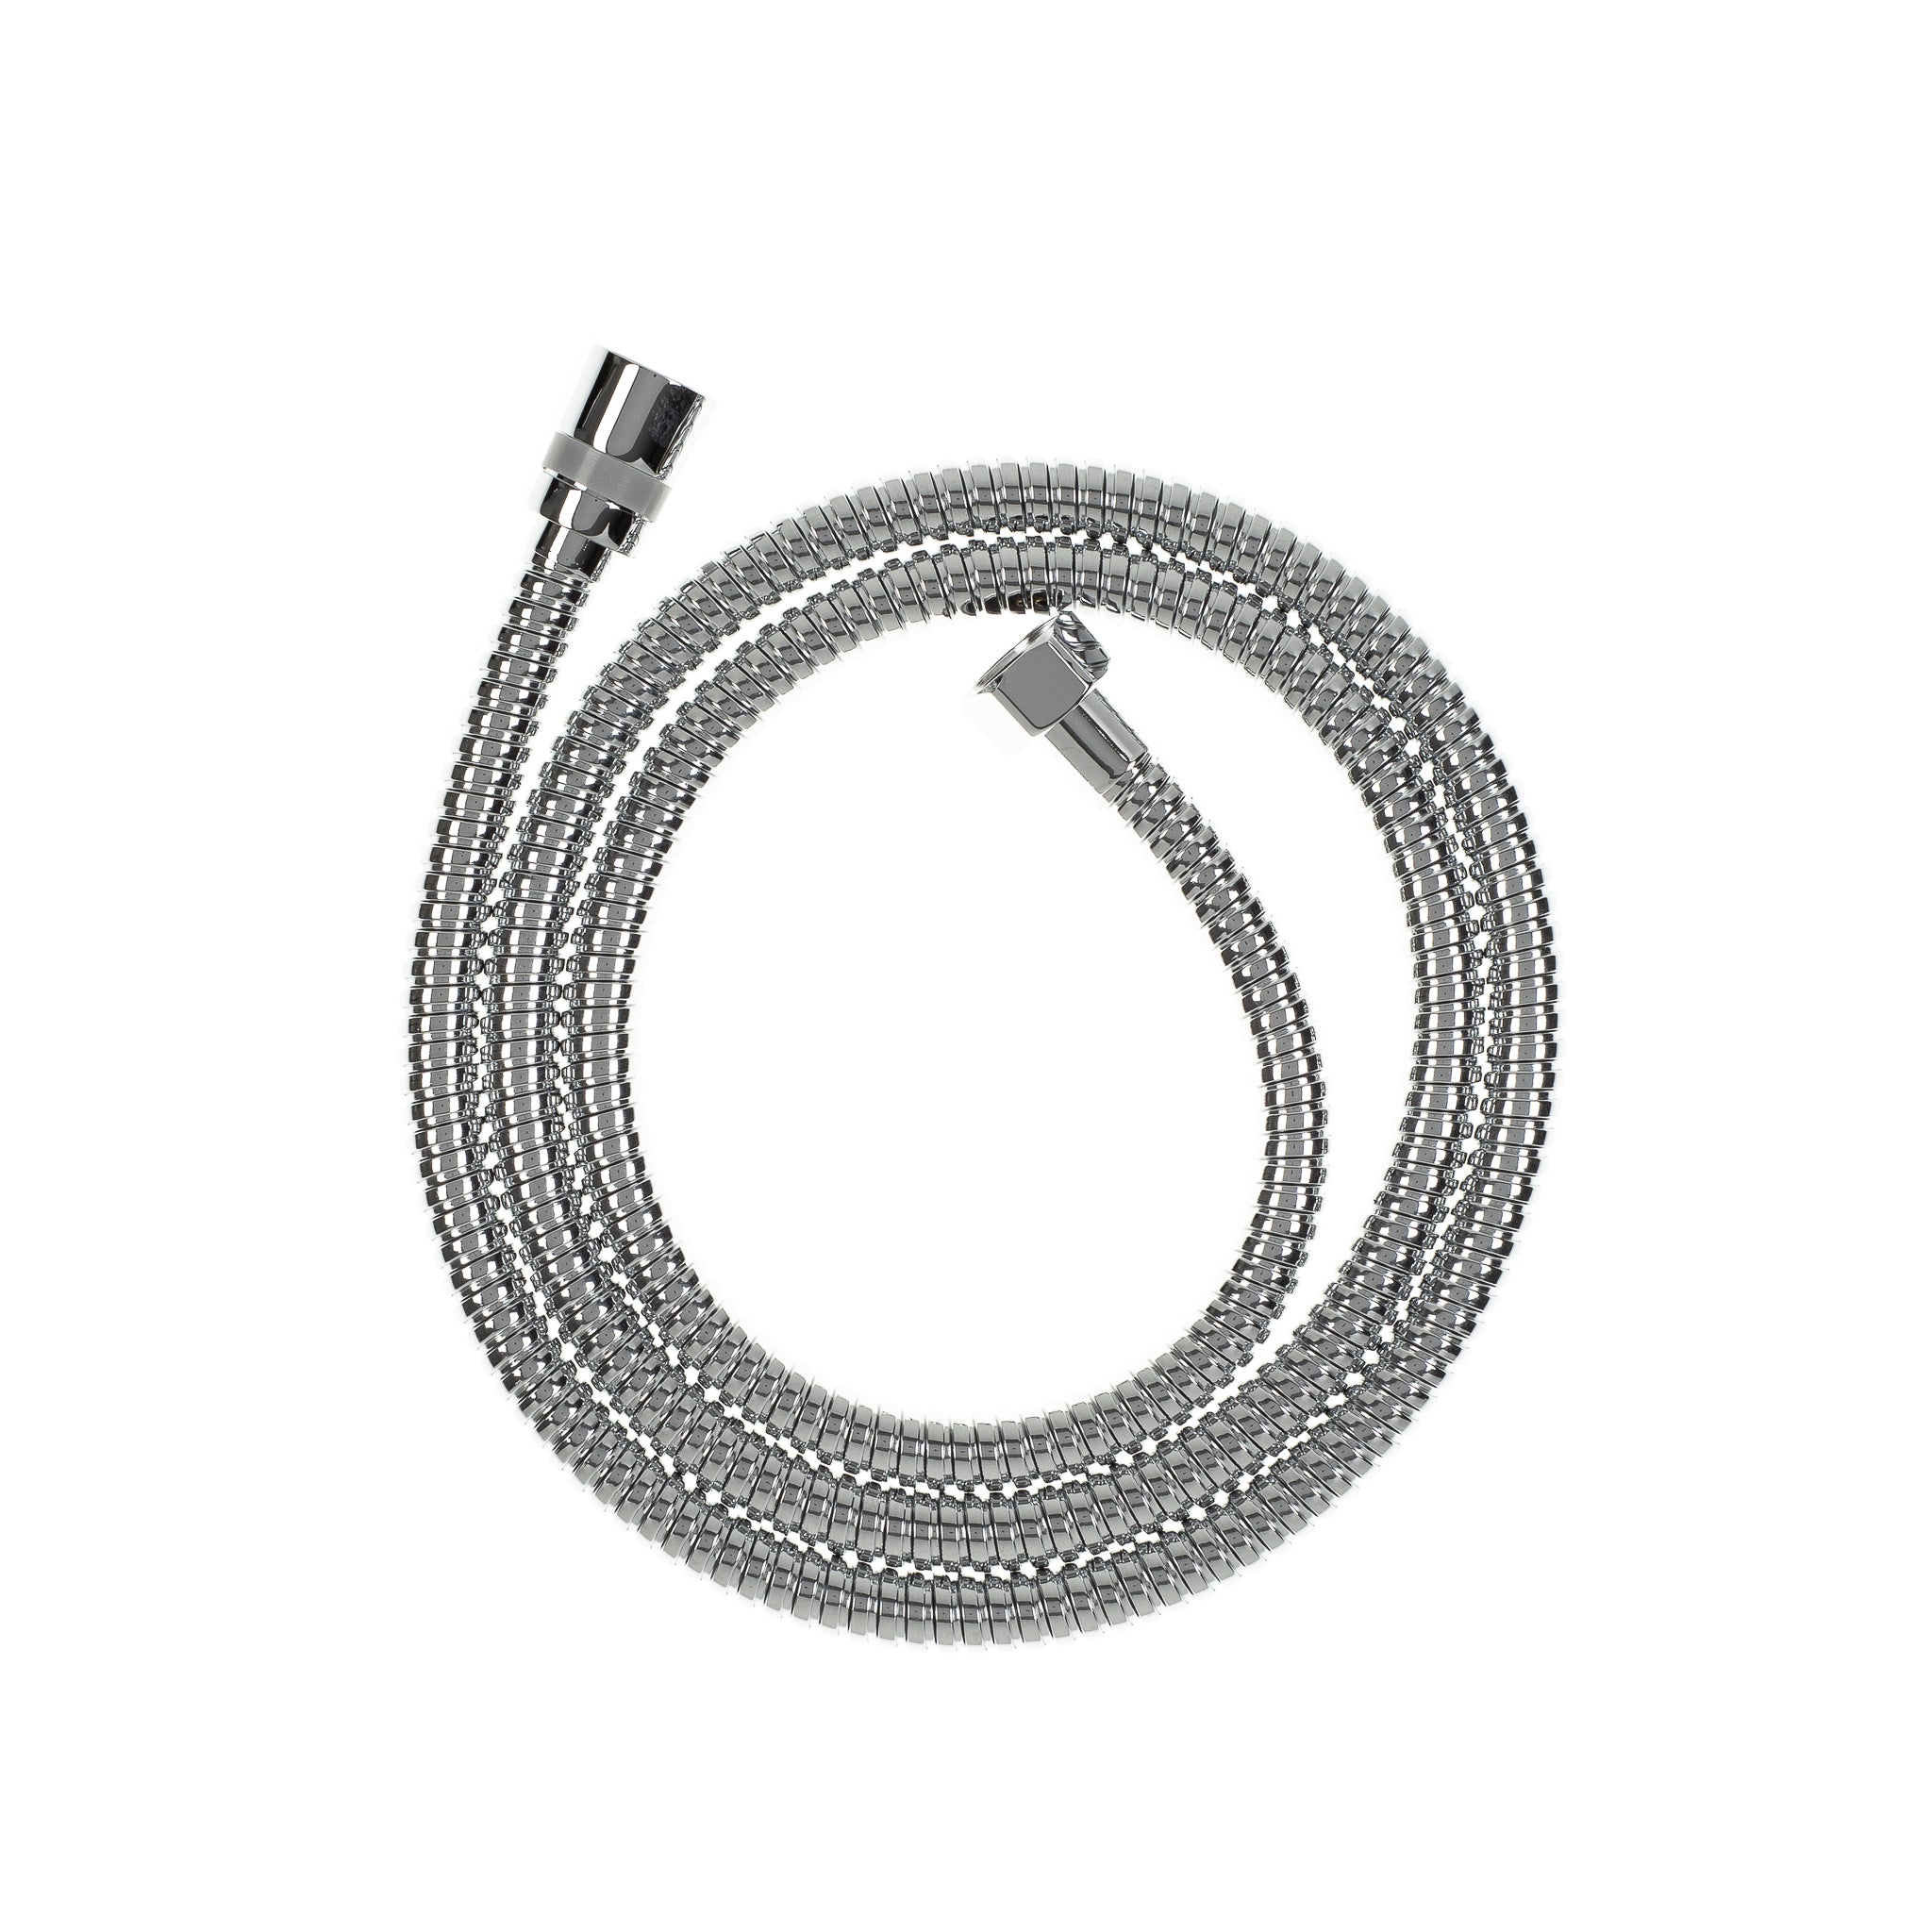 Stainless Steel Shower Hose - 1500mm, Polished Chrome